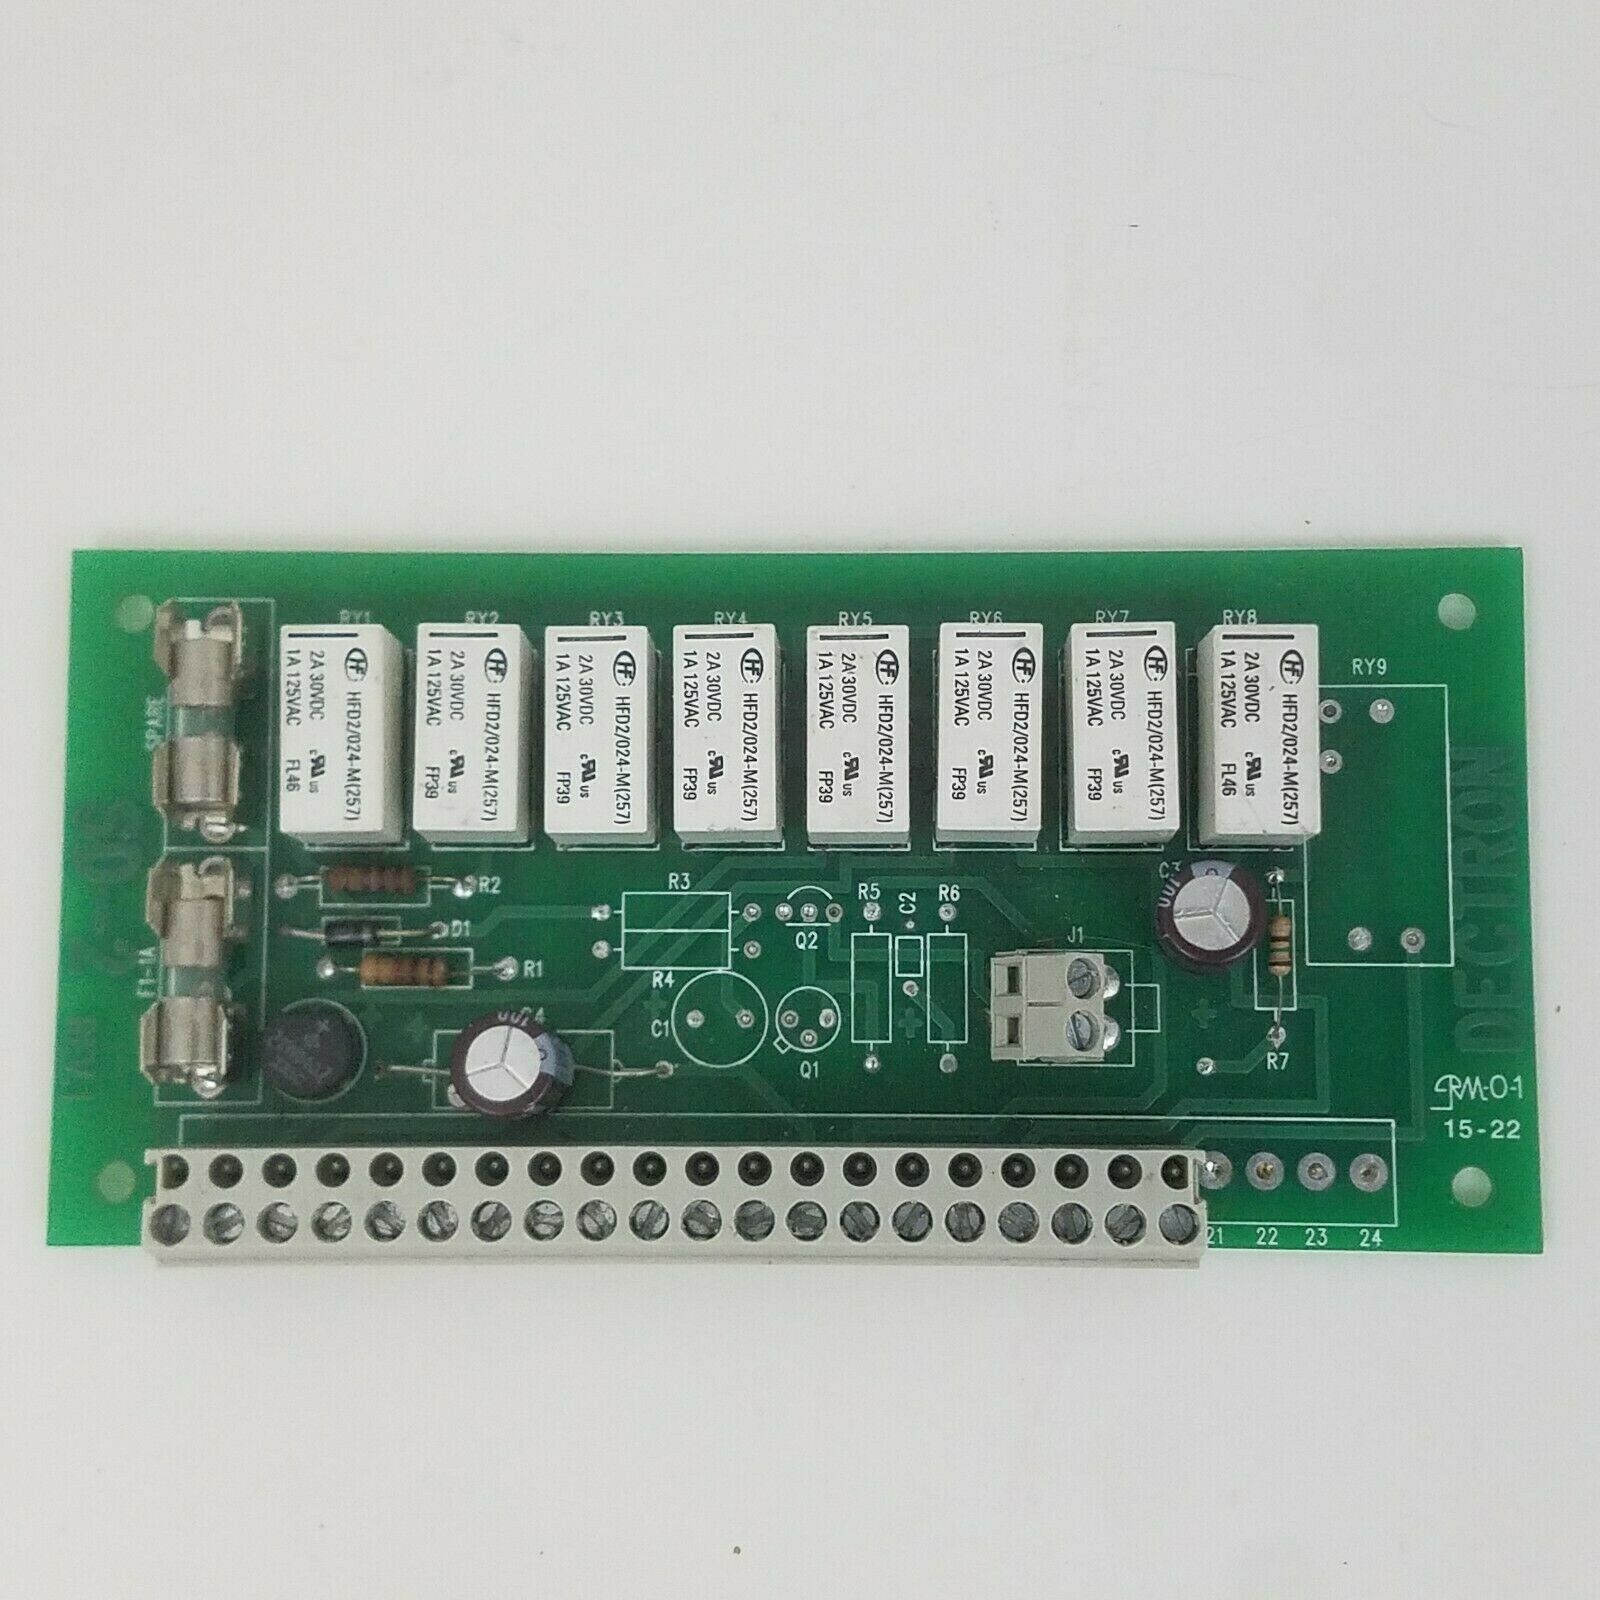 Dectron SD-2 PC Circuit Board for the DS-20-203 Pool Spa Heater Dehumidifier